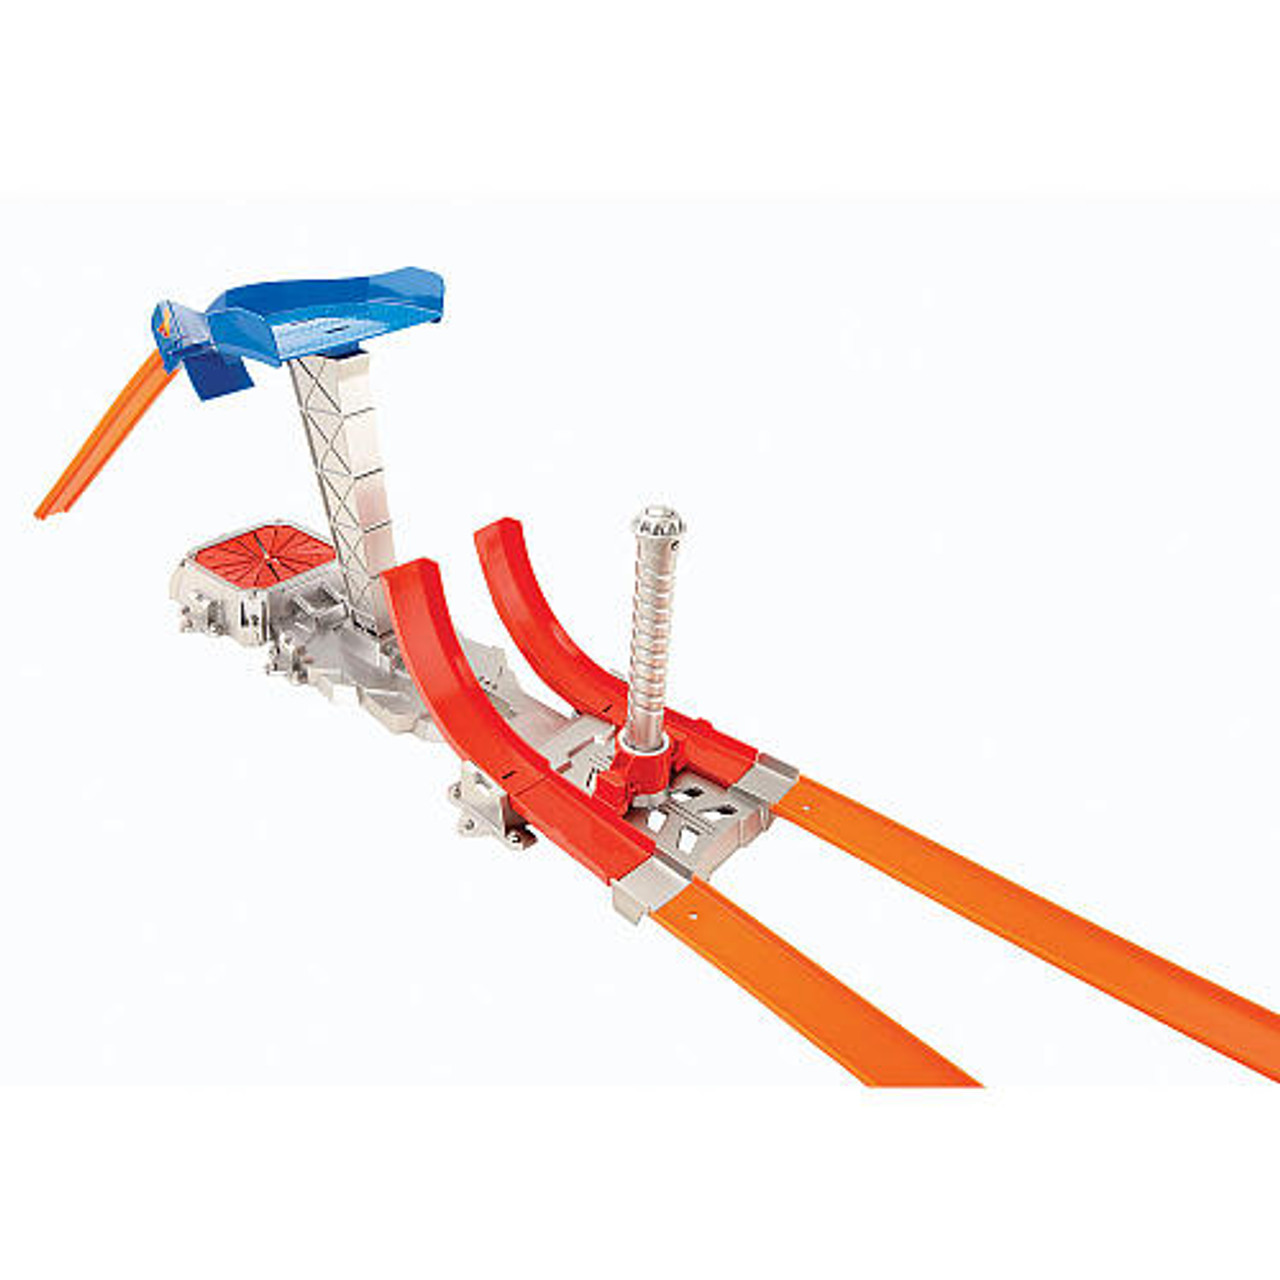 hot wheels double track